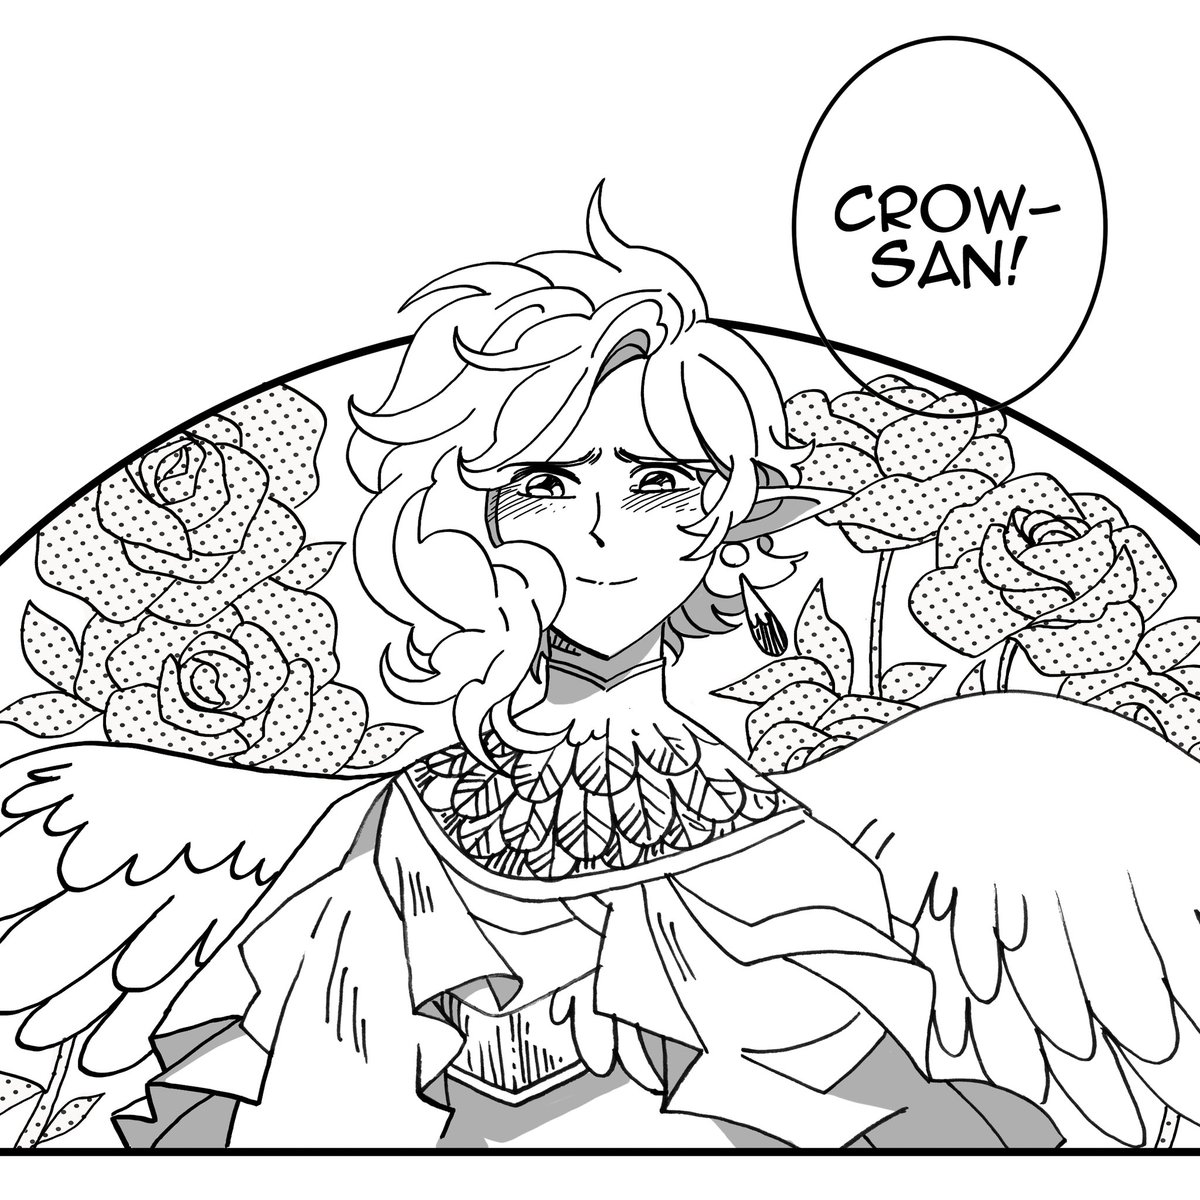 New Crow Time ✨️ (2/4)